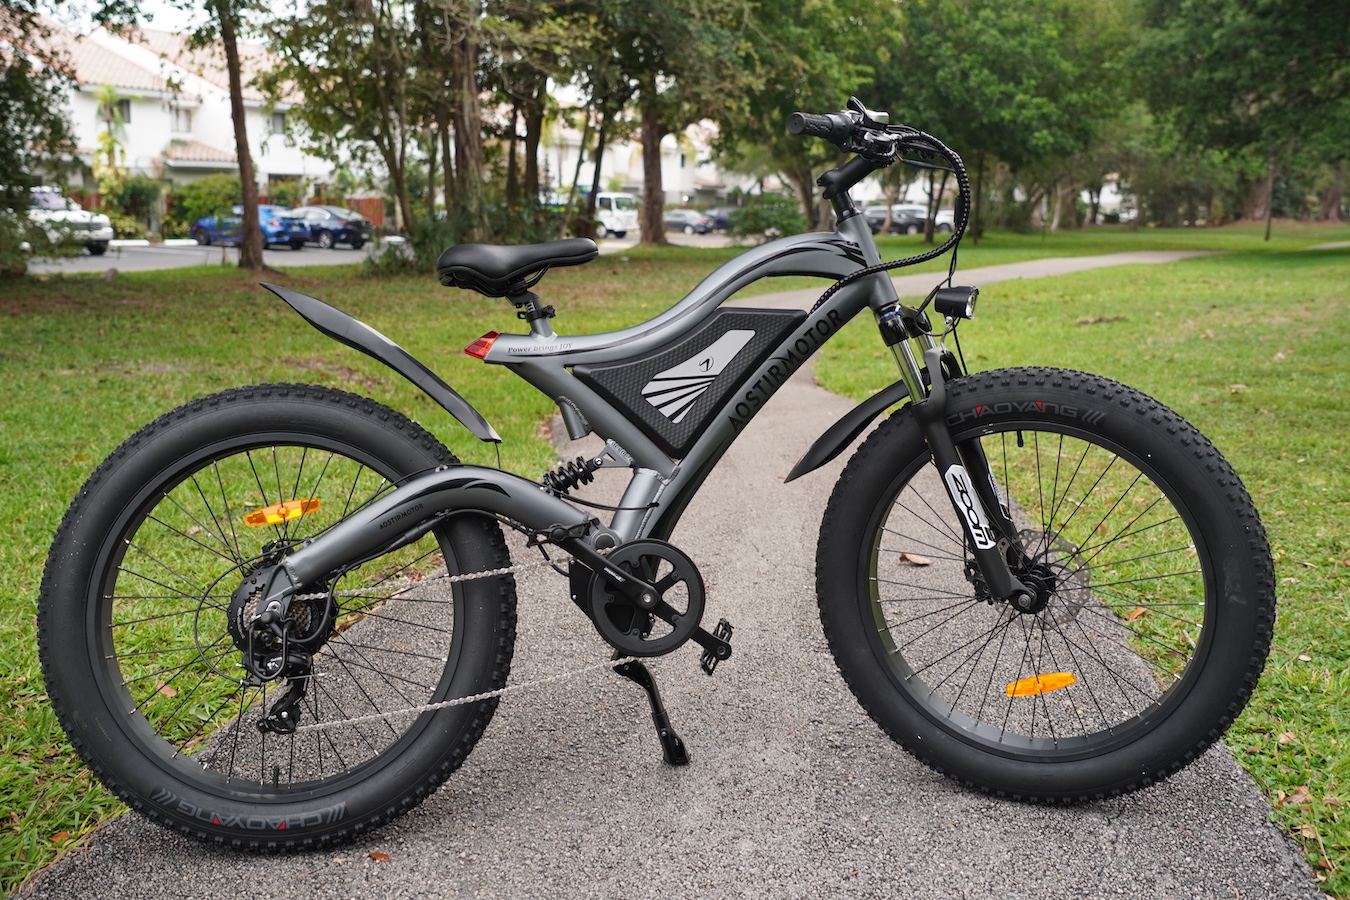 Full-suspension fat tire electric bike for cheap: Aostirmotor S18 review